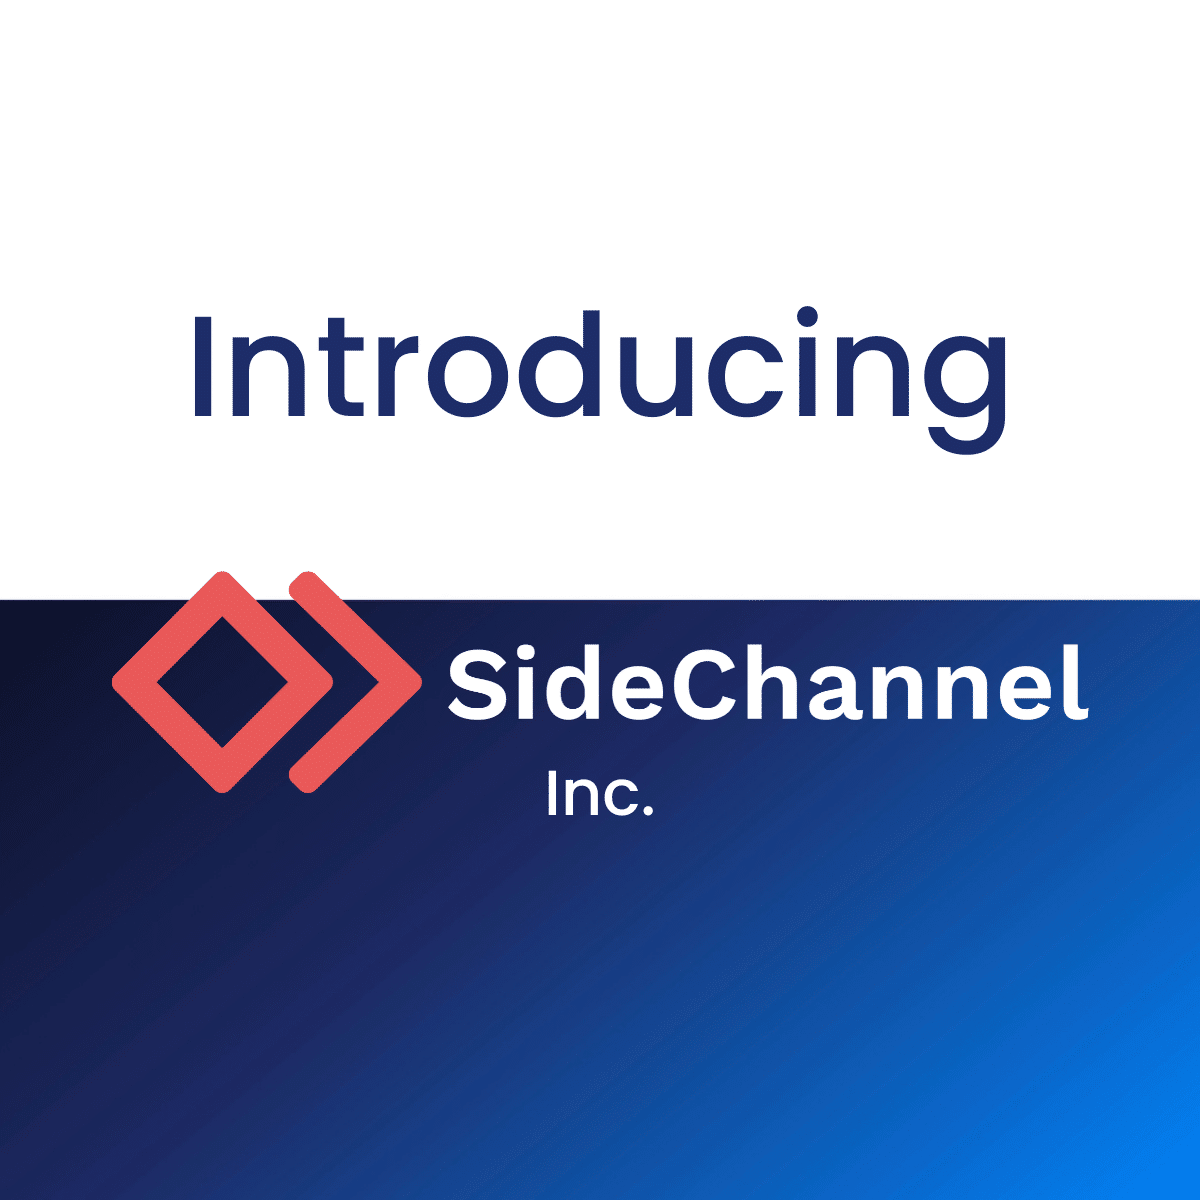 Red SideChannel logo on a blue & white background